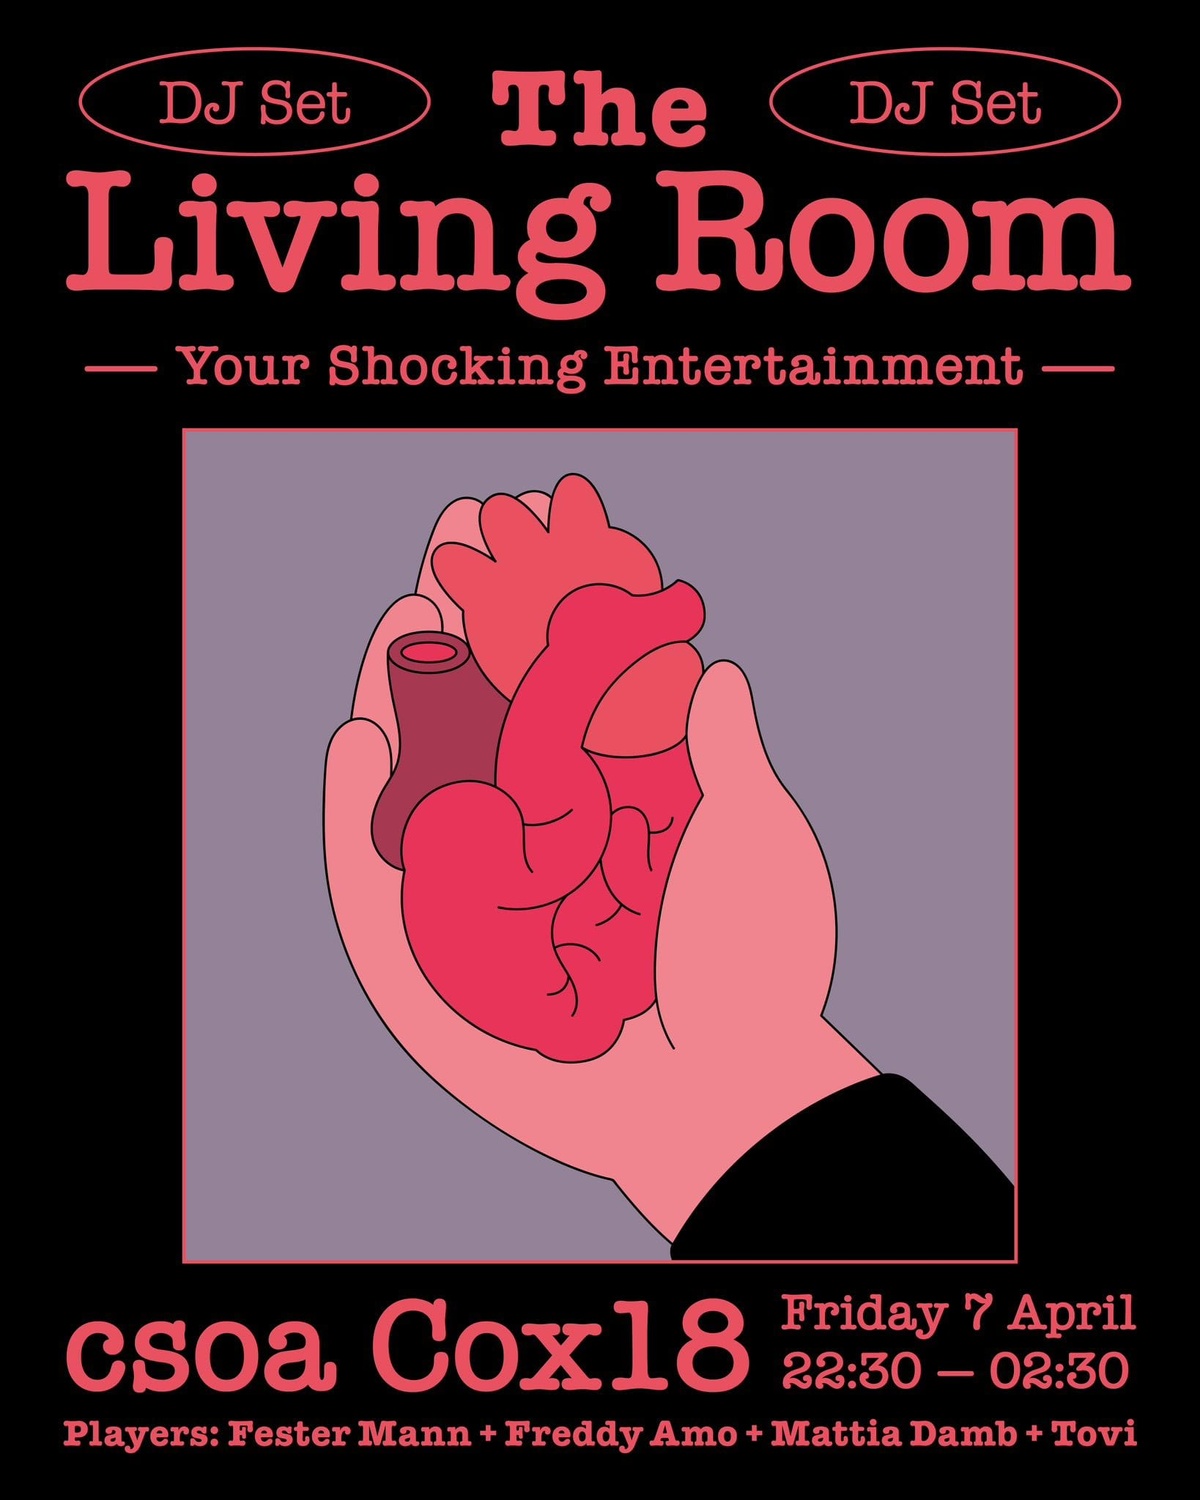 The Living Room – Your Shocking Entertainment